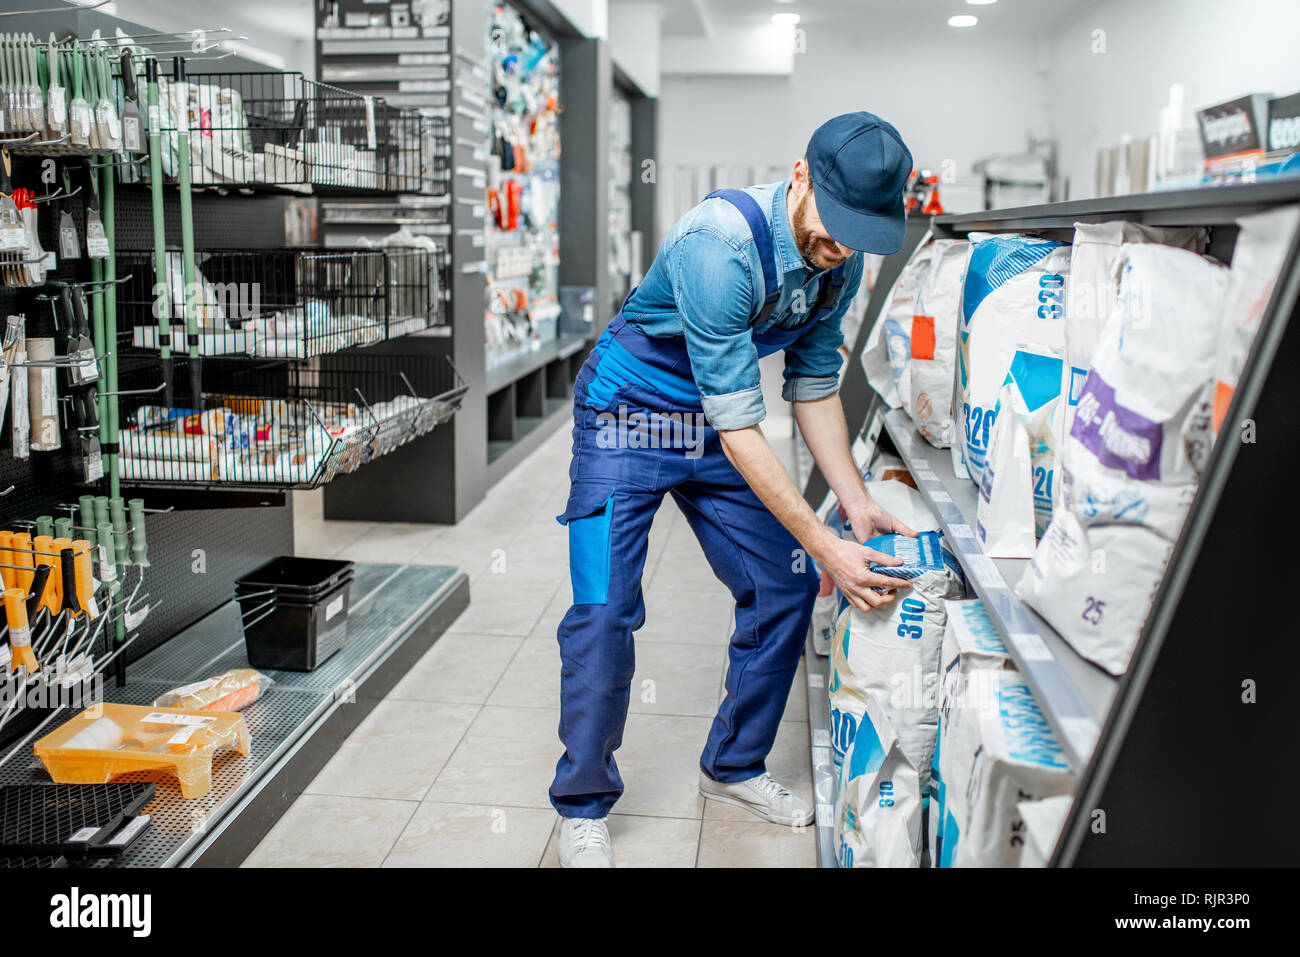 Workman in blue overalls taking a bag with construction mixture, buying materials for repairing in the building supermarket Stock Photo